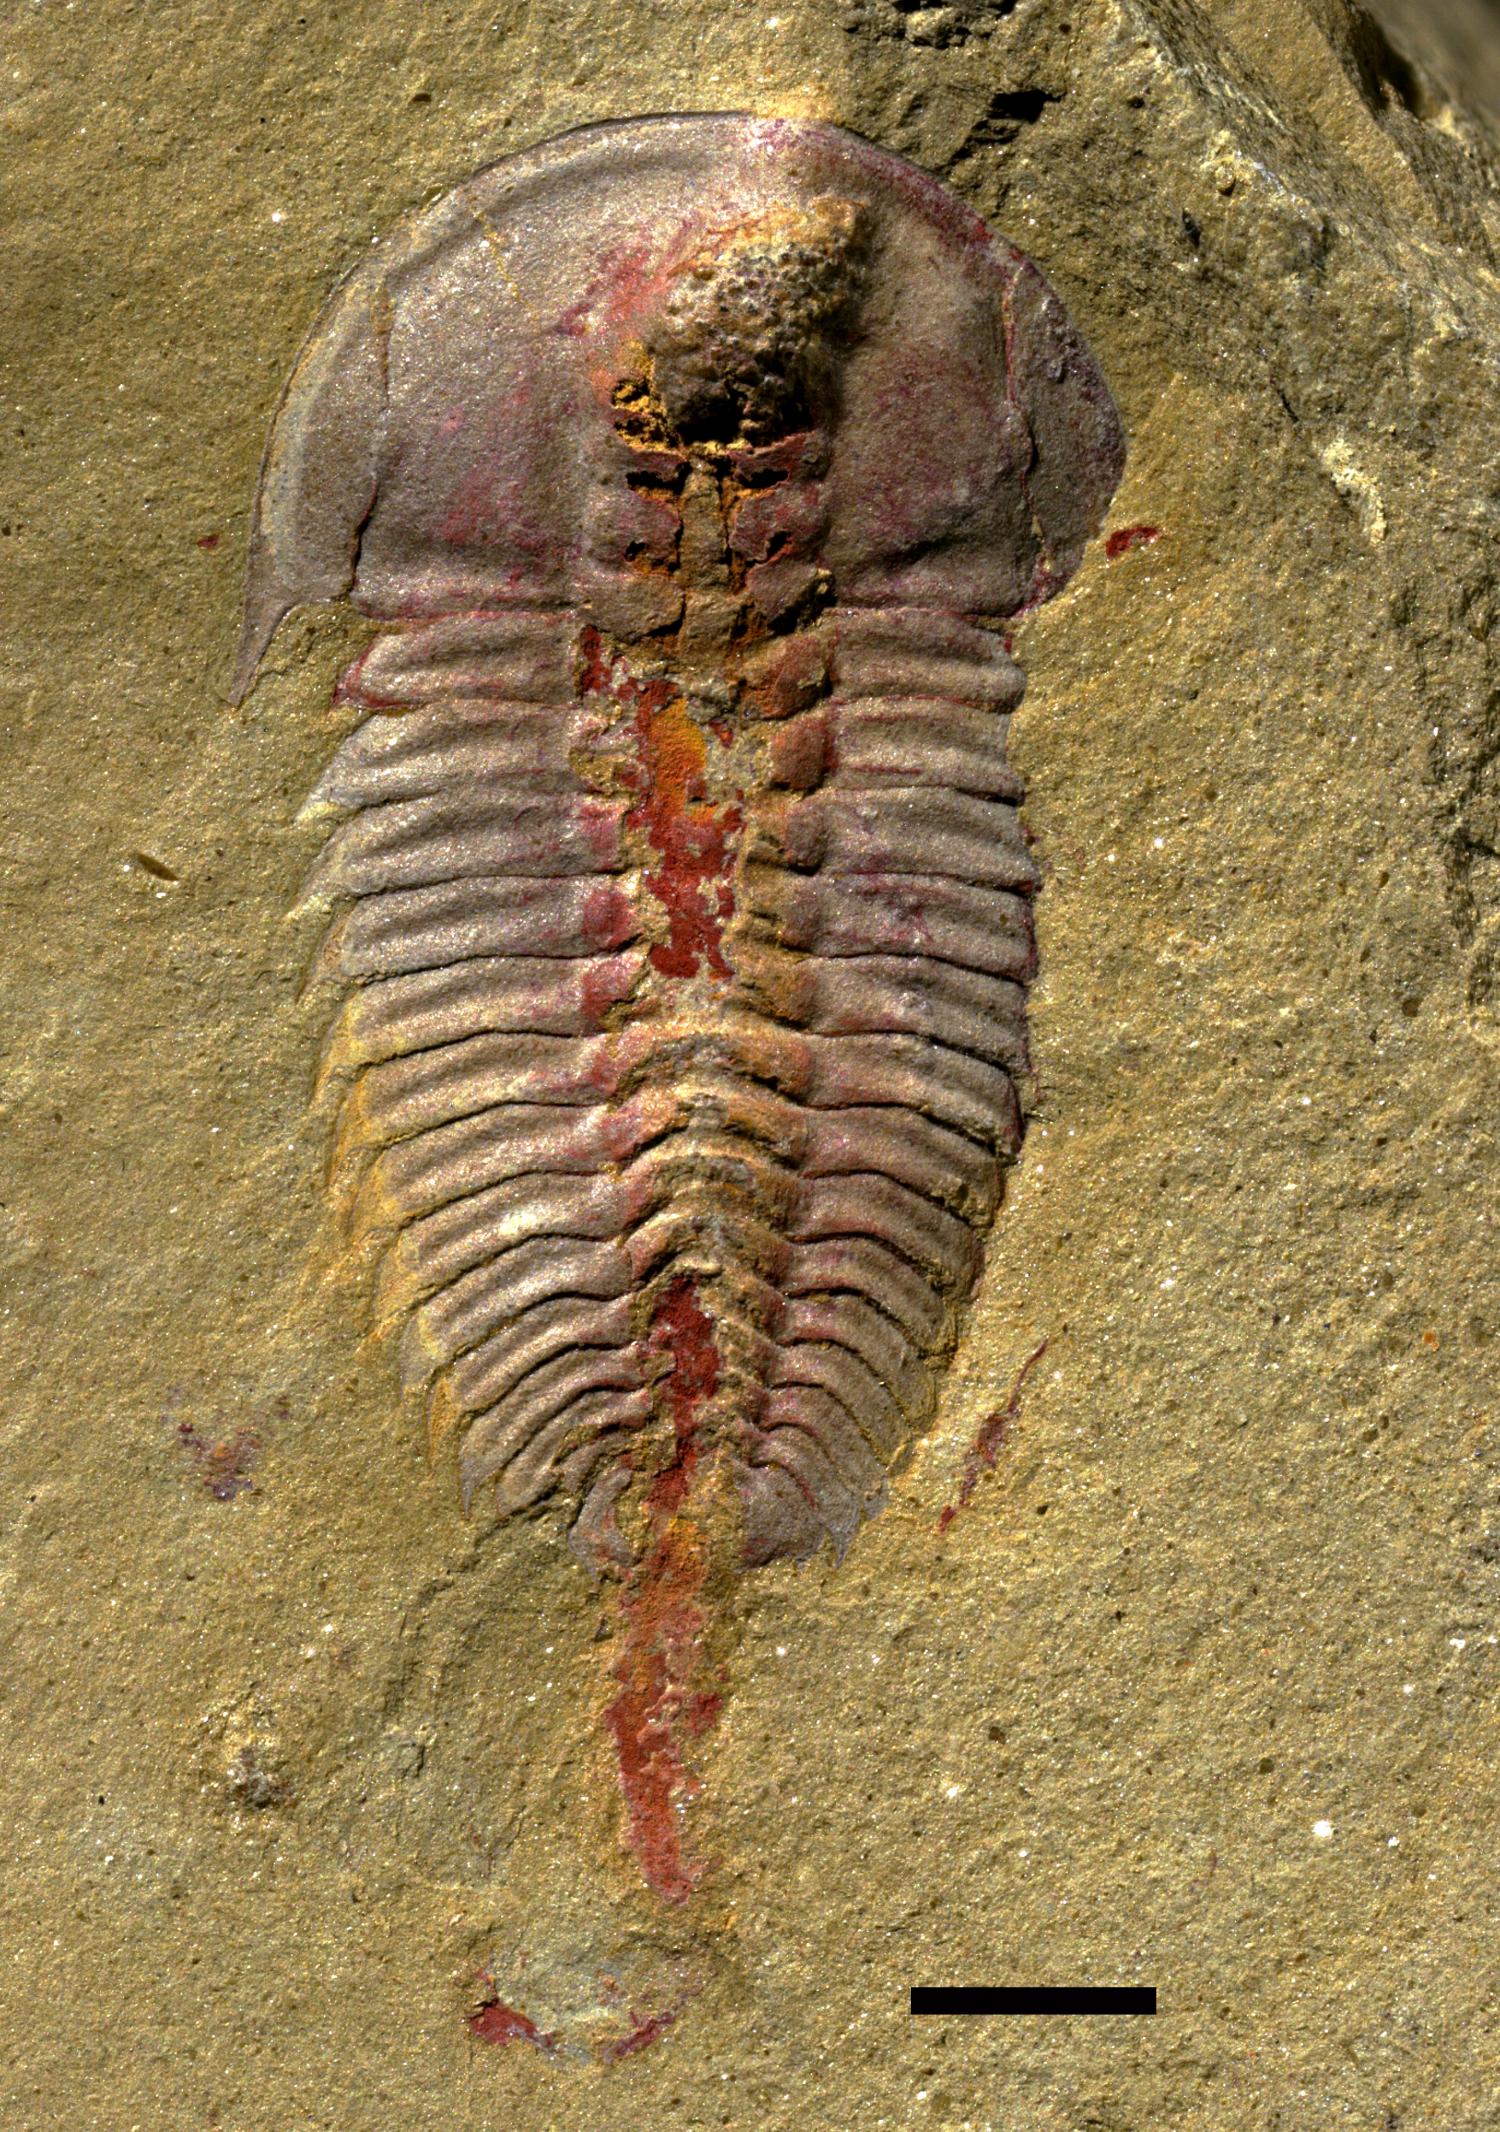 Early trilobites had stomachs, new fossil study finds